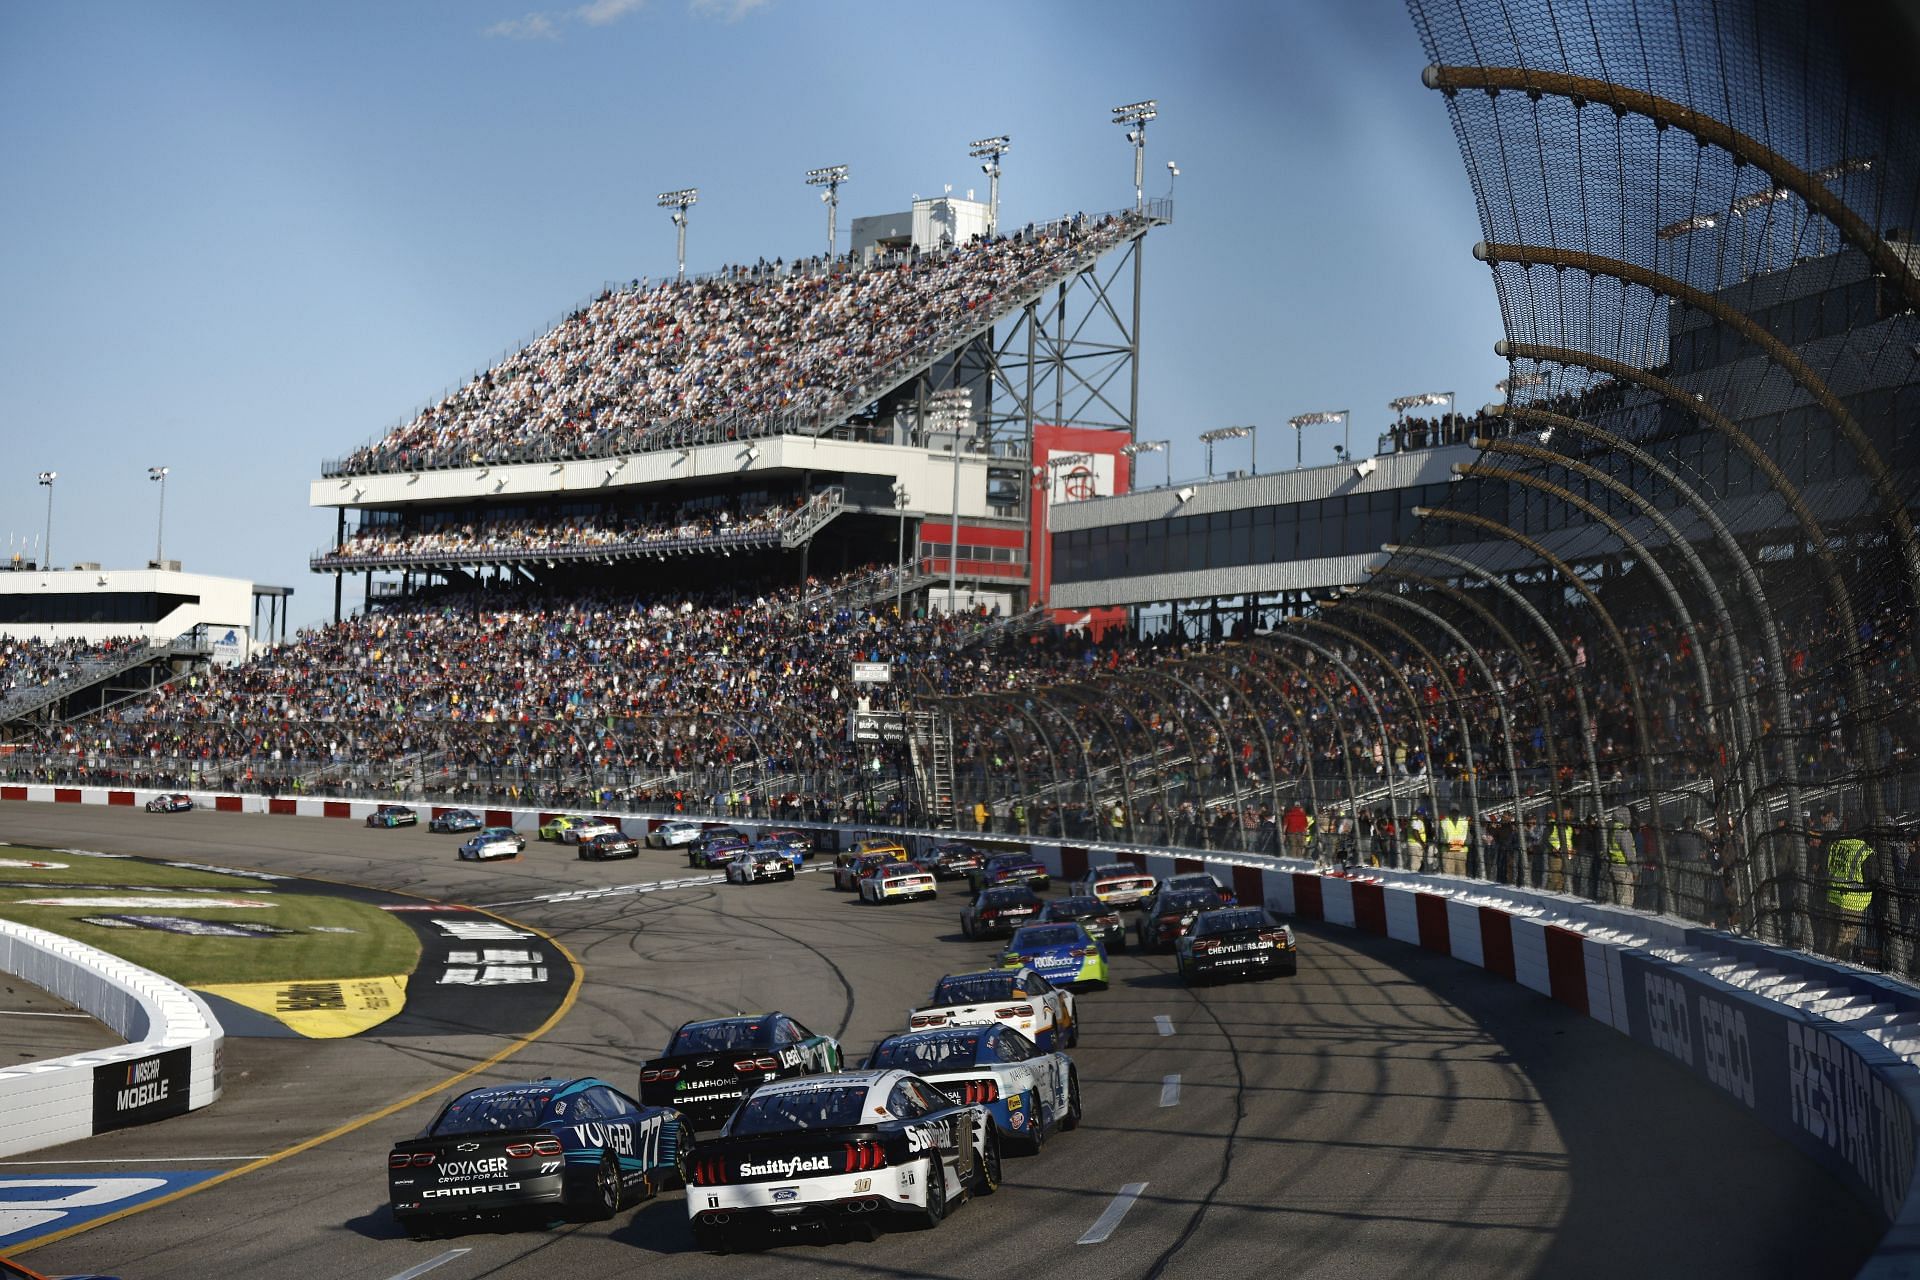 A general view of racing during the NASCAR Cup Series Toyota Owners 400 at Richmond Raceway (Photo by Jared C. Tilton/Getty Images)